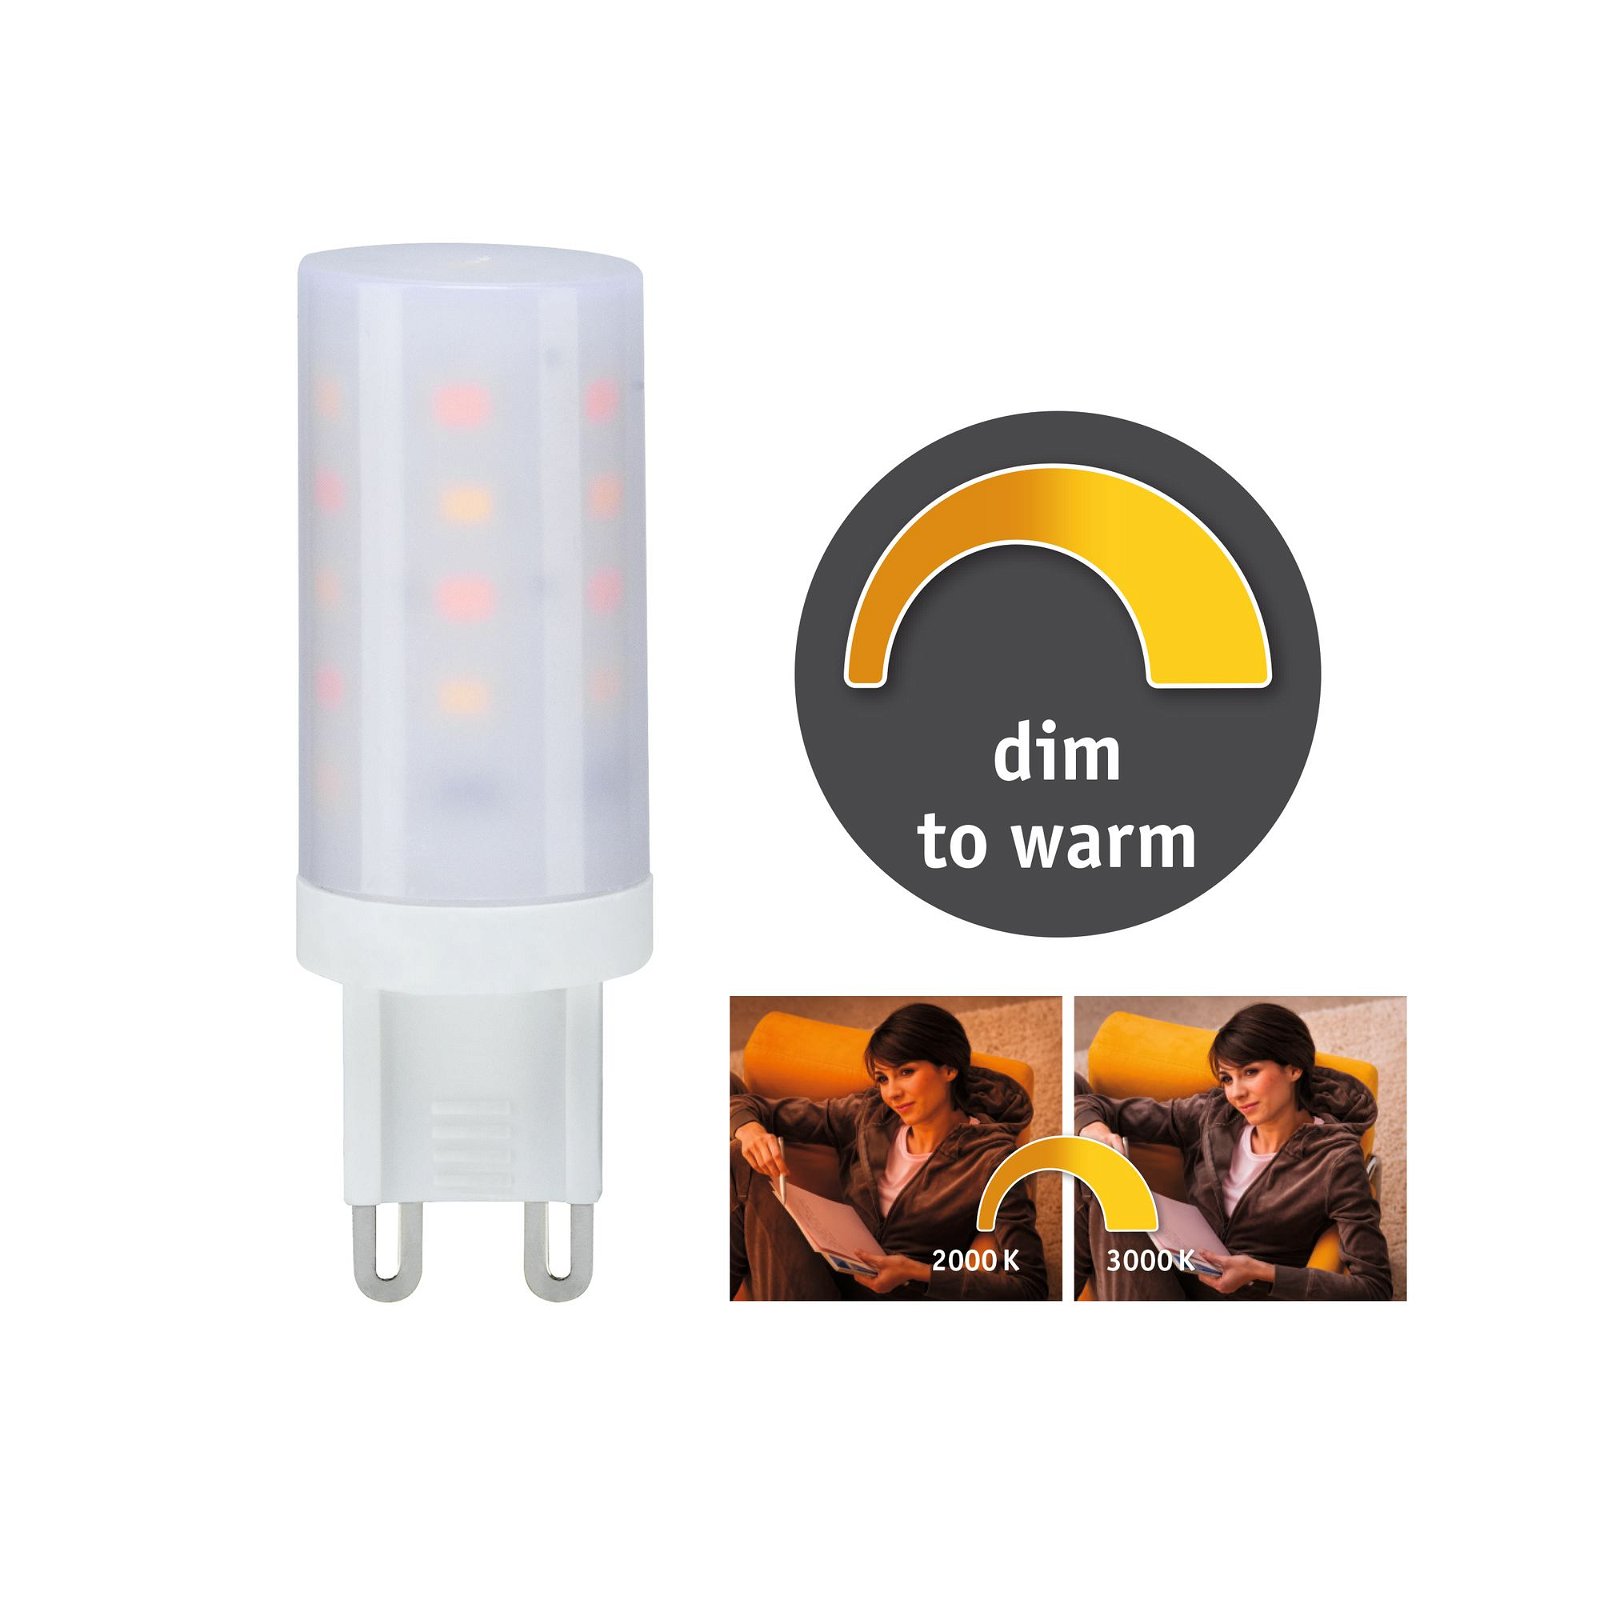 230 V Standard LED Pin base G9 1 pack 270lm 4W Dim to warm dimmable Clear